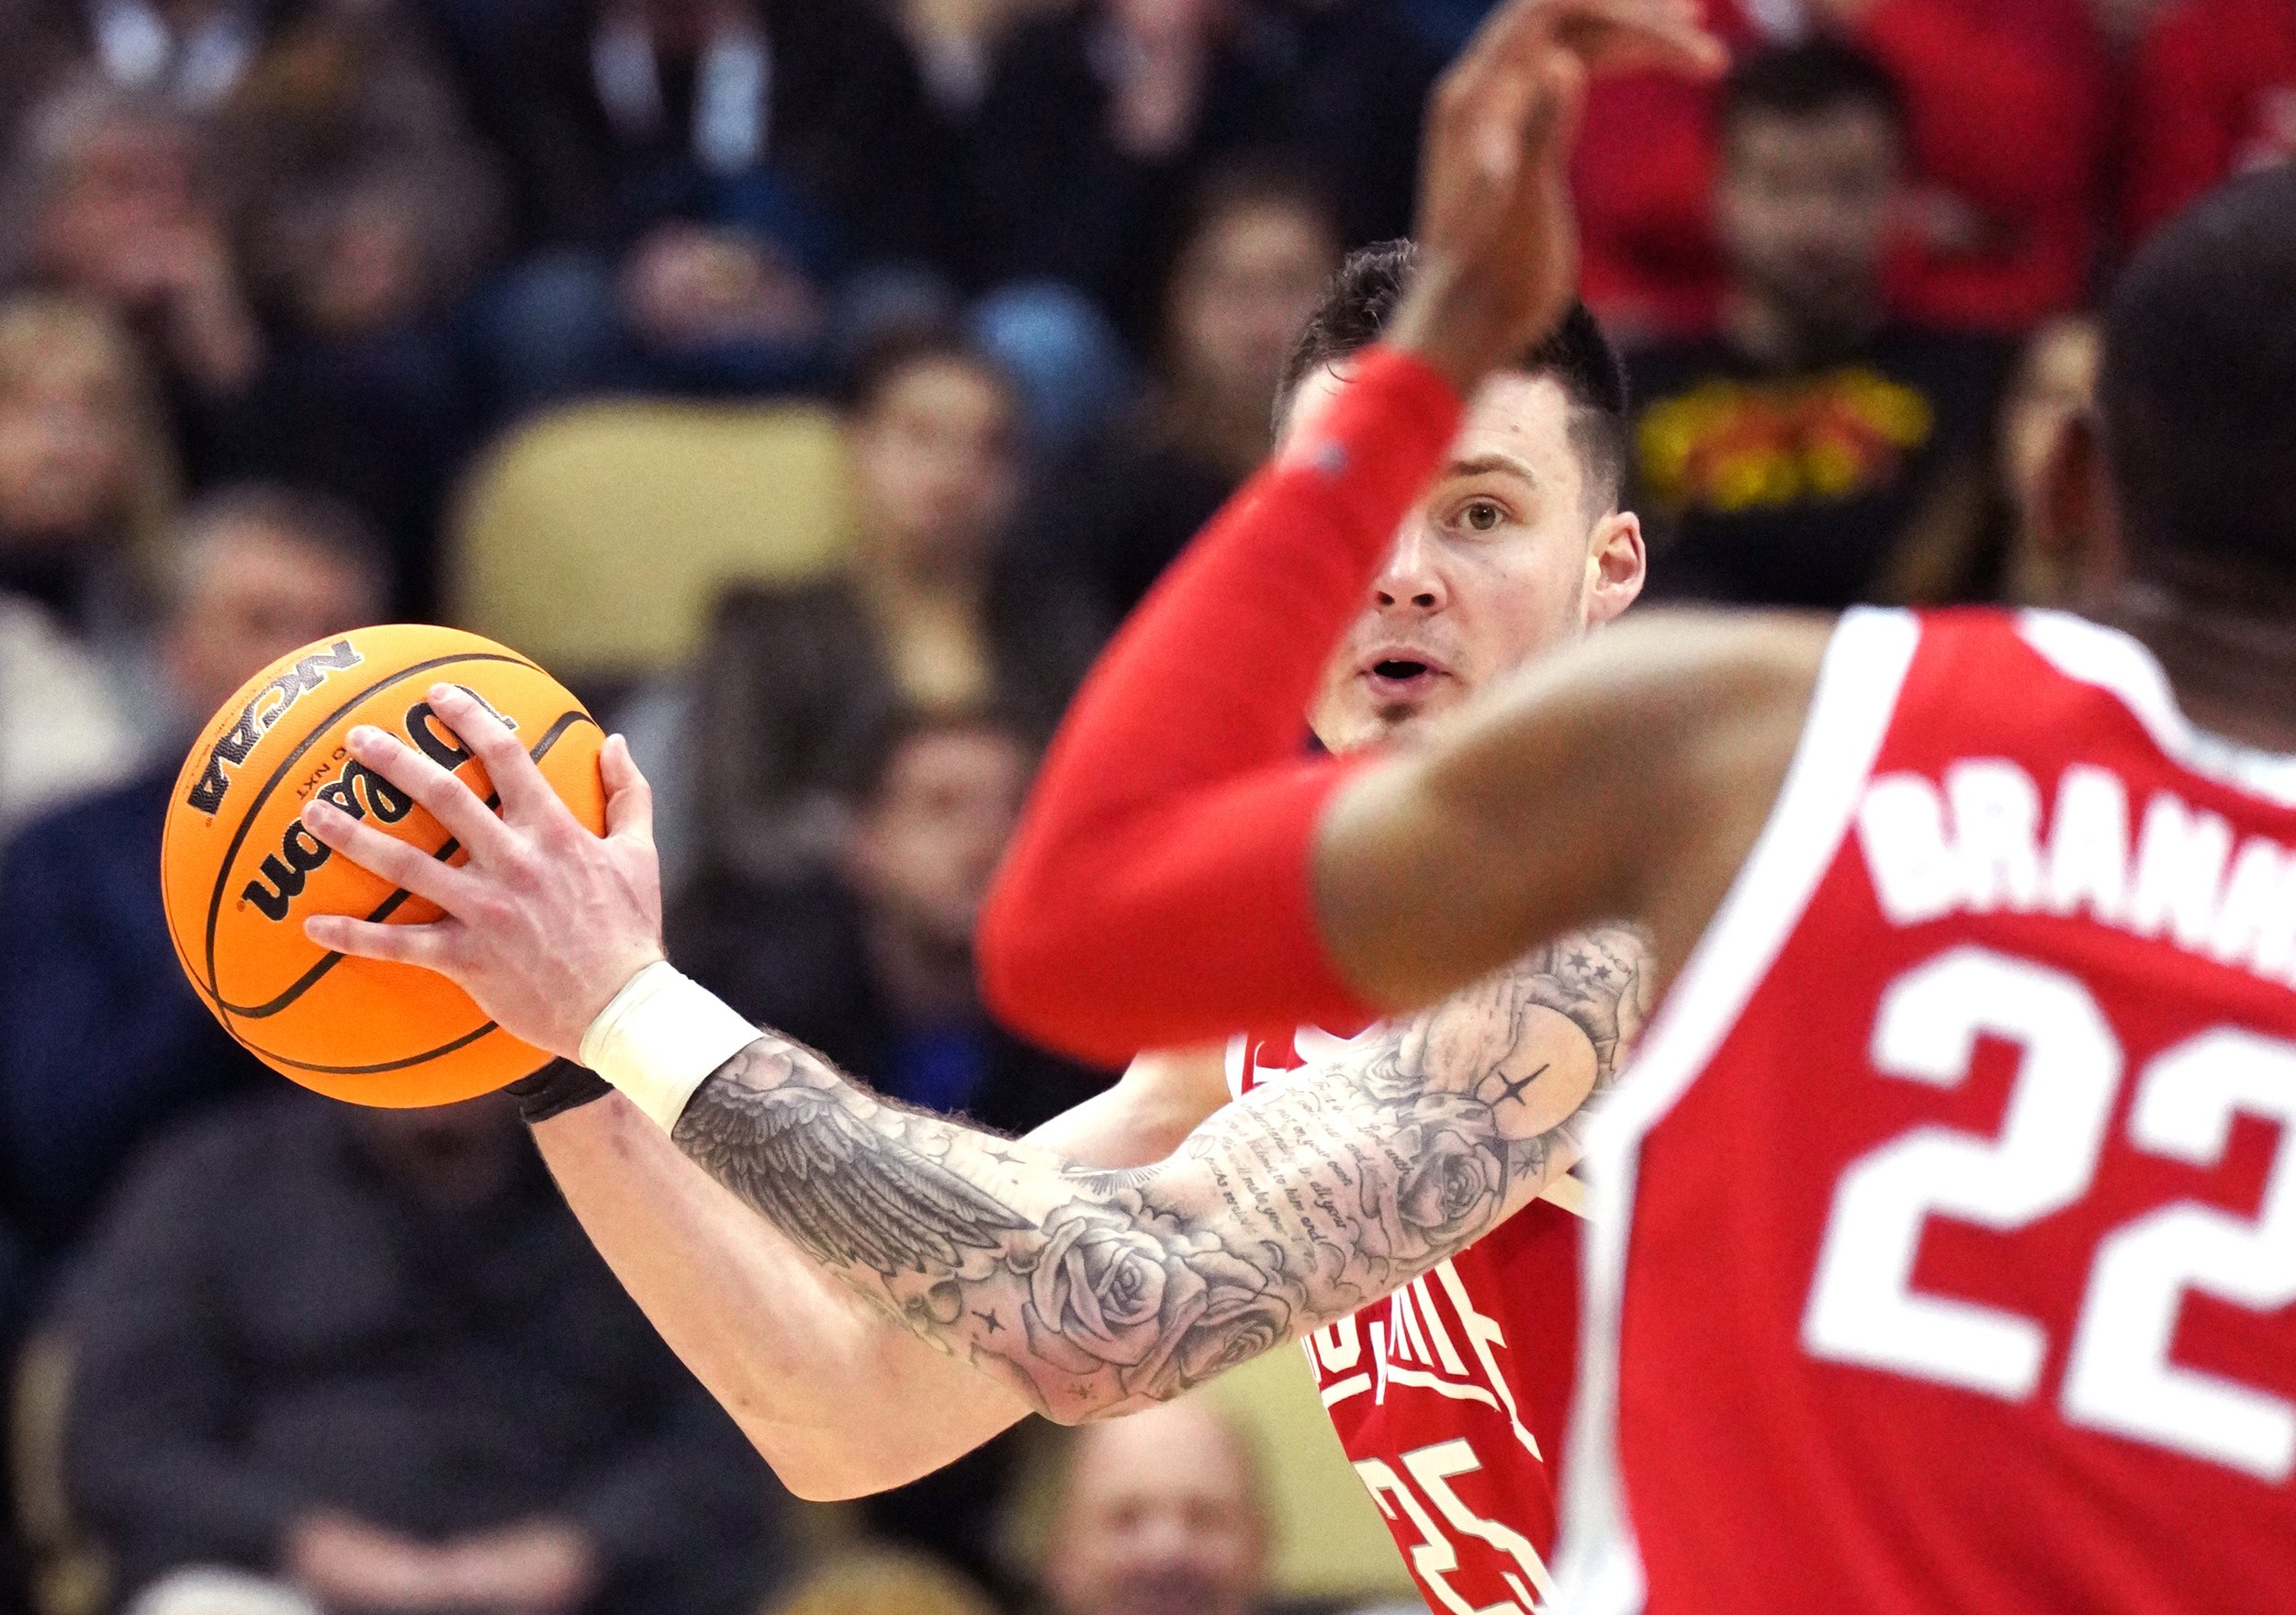  Ohio State’s Kyle Young looks to pass the ball against Villanova during the second round of the 2022 NCAA Men's Basketball Tournament on Sunday, March 20, 2022, at Pittsburgh’s PPG Paints Arena. Villanova won 71-61. (Emily Matthews/Post-Gazette)  